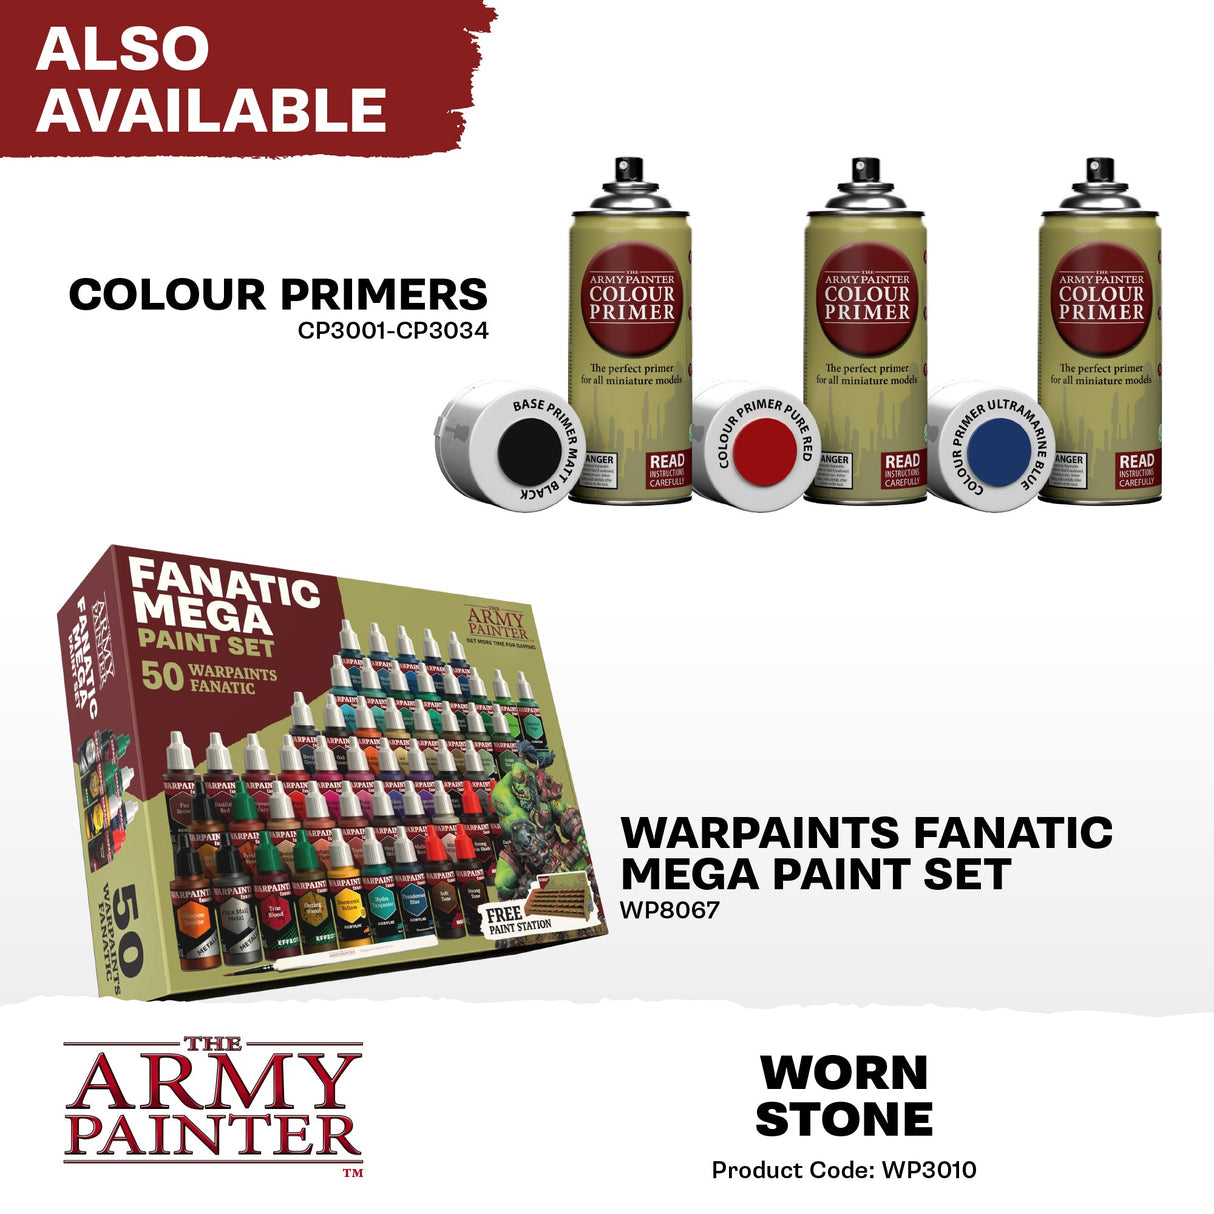 The Army Painter - Warpaints Fanatic: Worn Stone